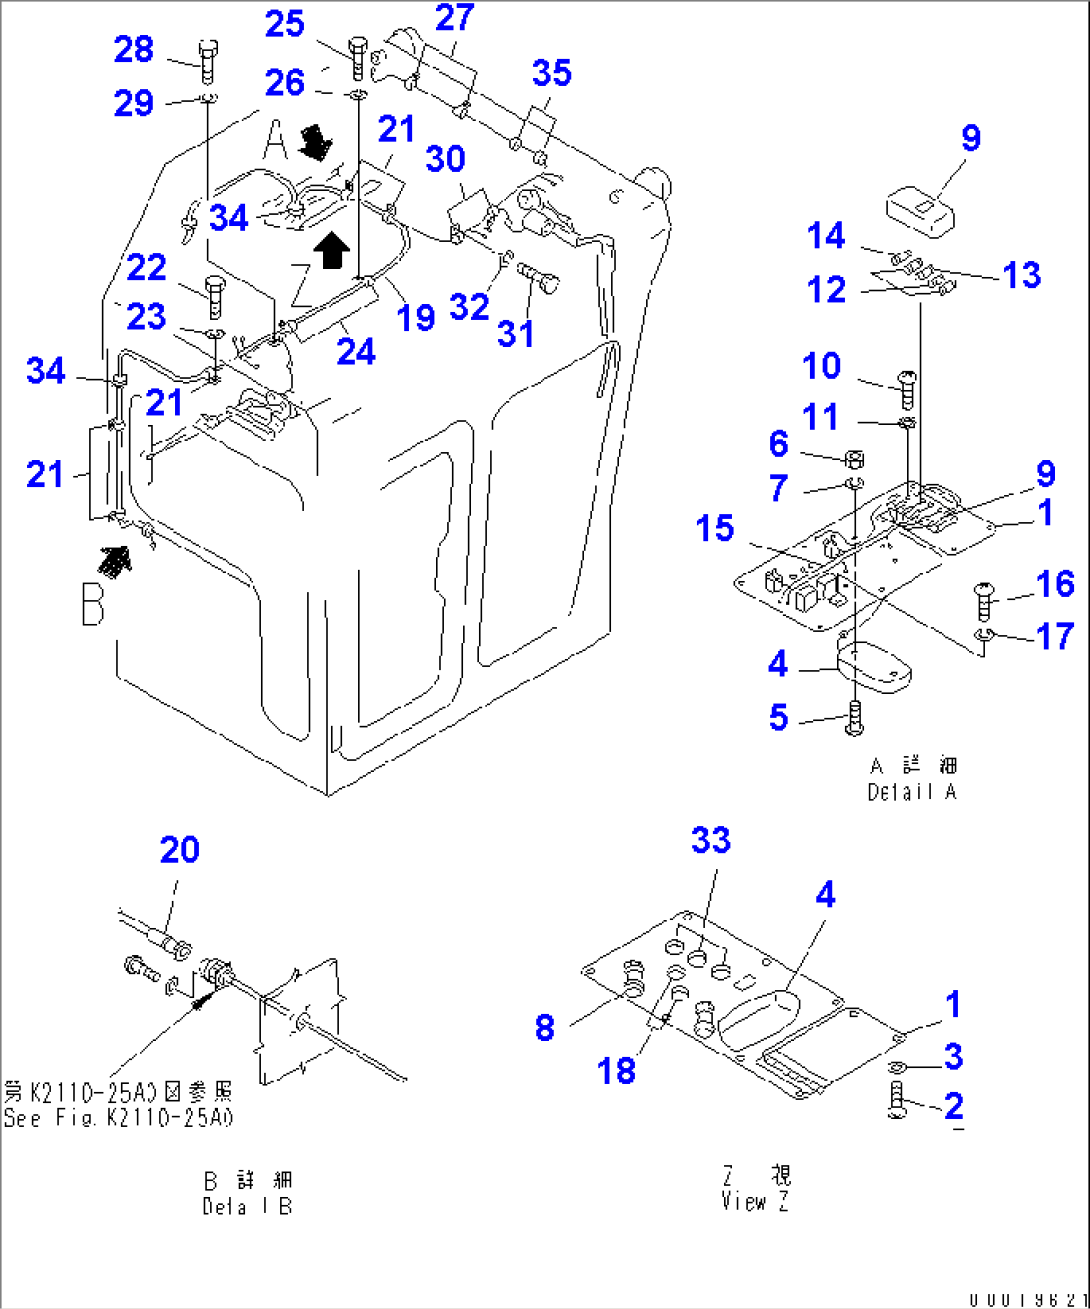 CAB (ELECTRICAL PARTS) (WITH BEACON) (FOR C.I.S.)(#31586-)